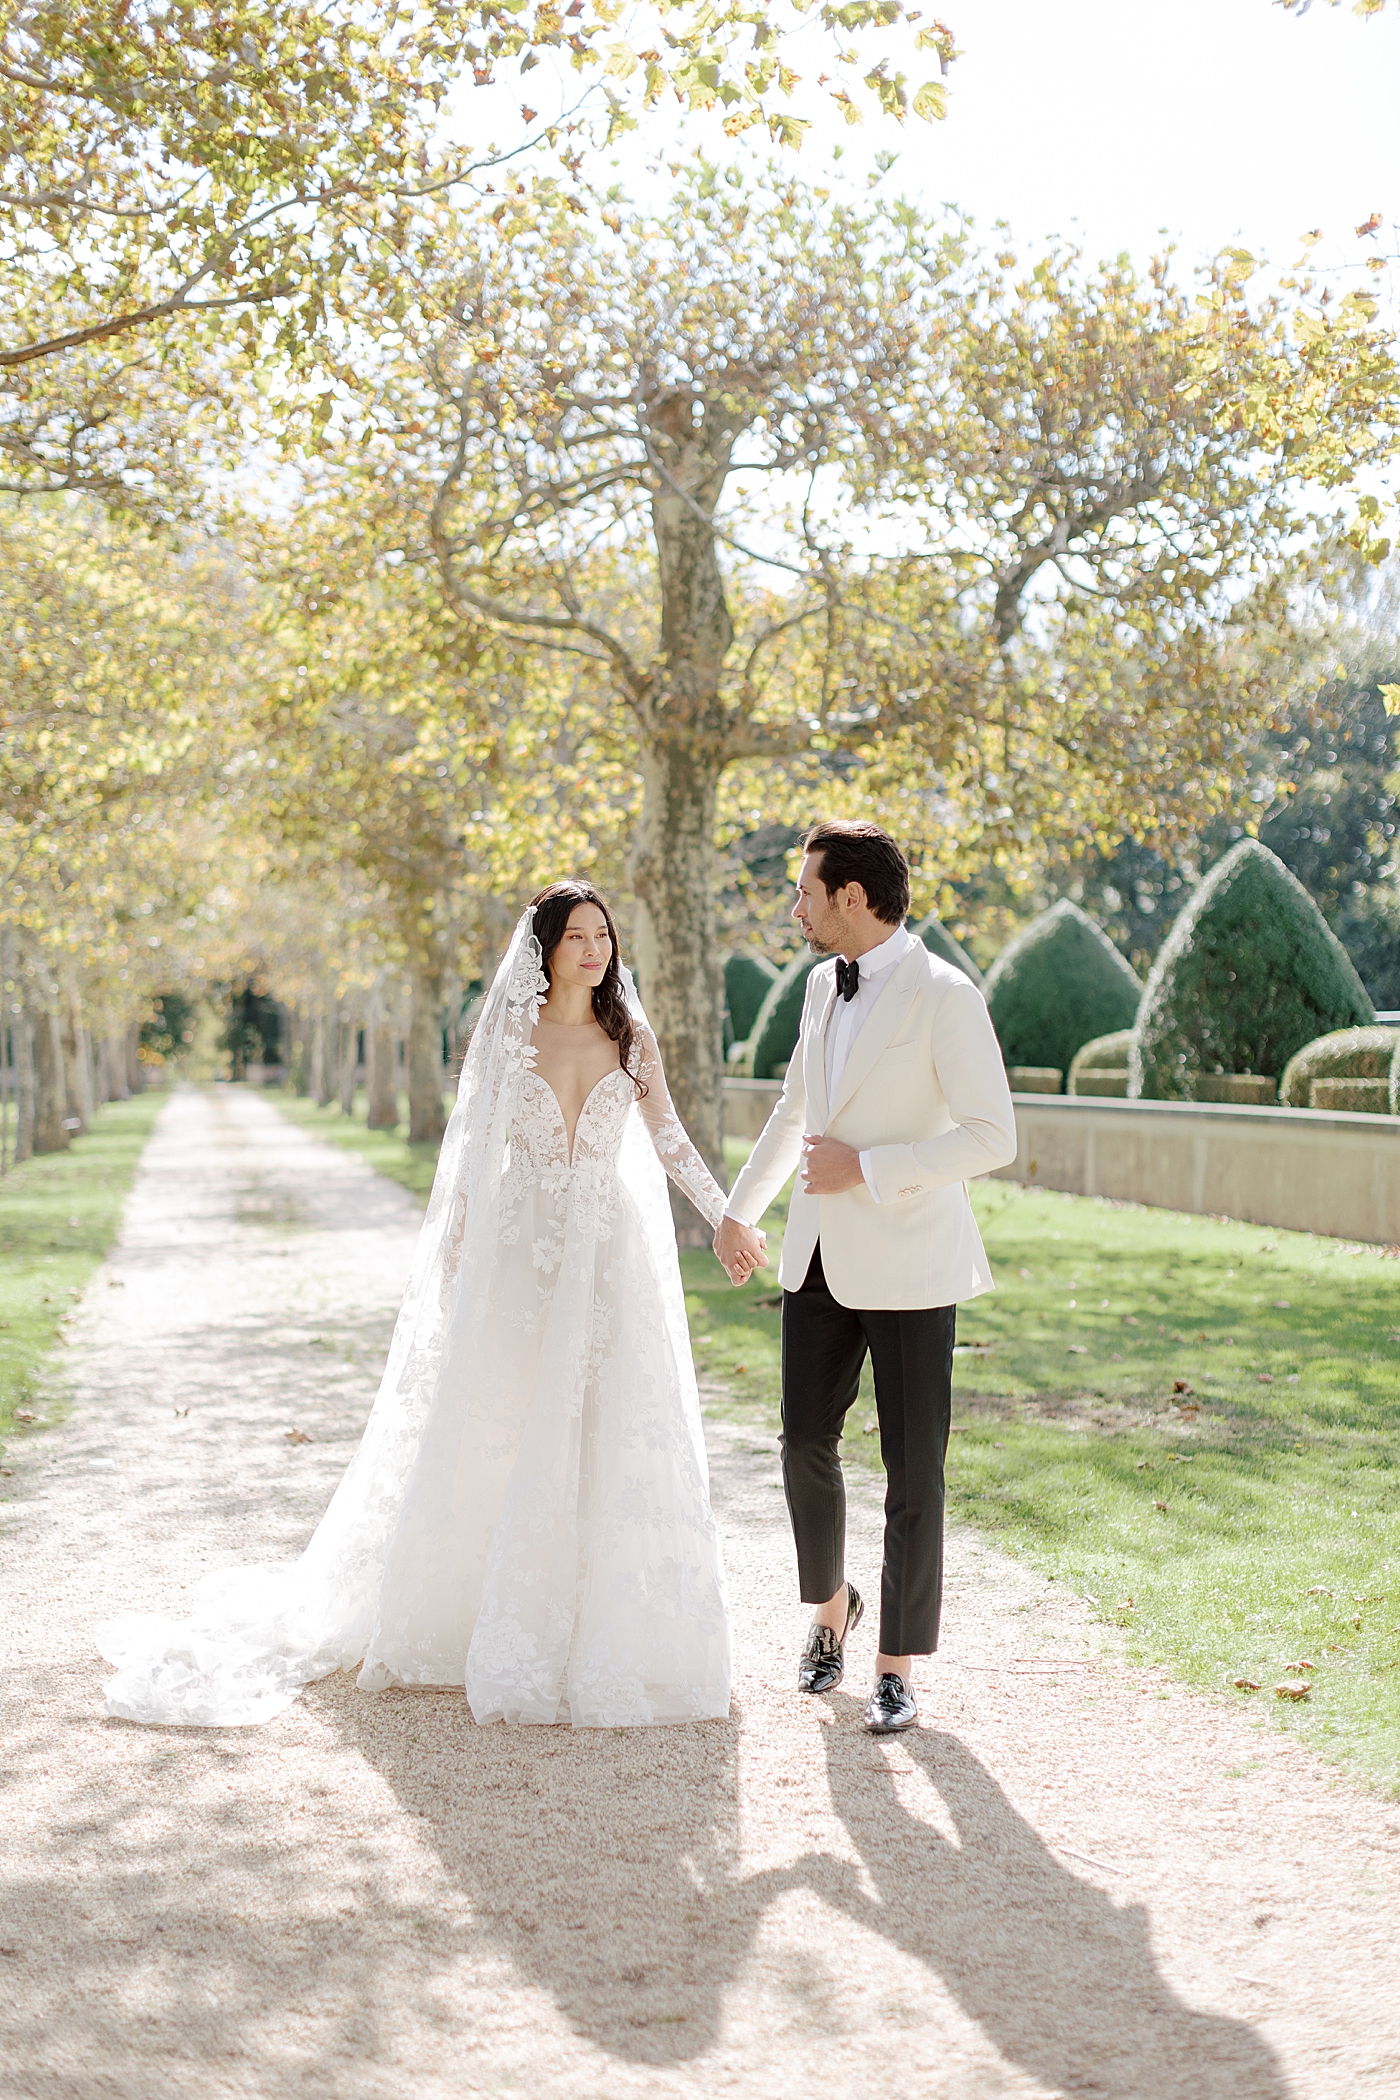 Portrait of bride and groom walking at the end of a tree-lined driveway during Oheka castle wedding | Image by Hope Helmuth Photography